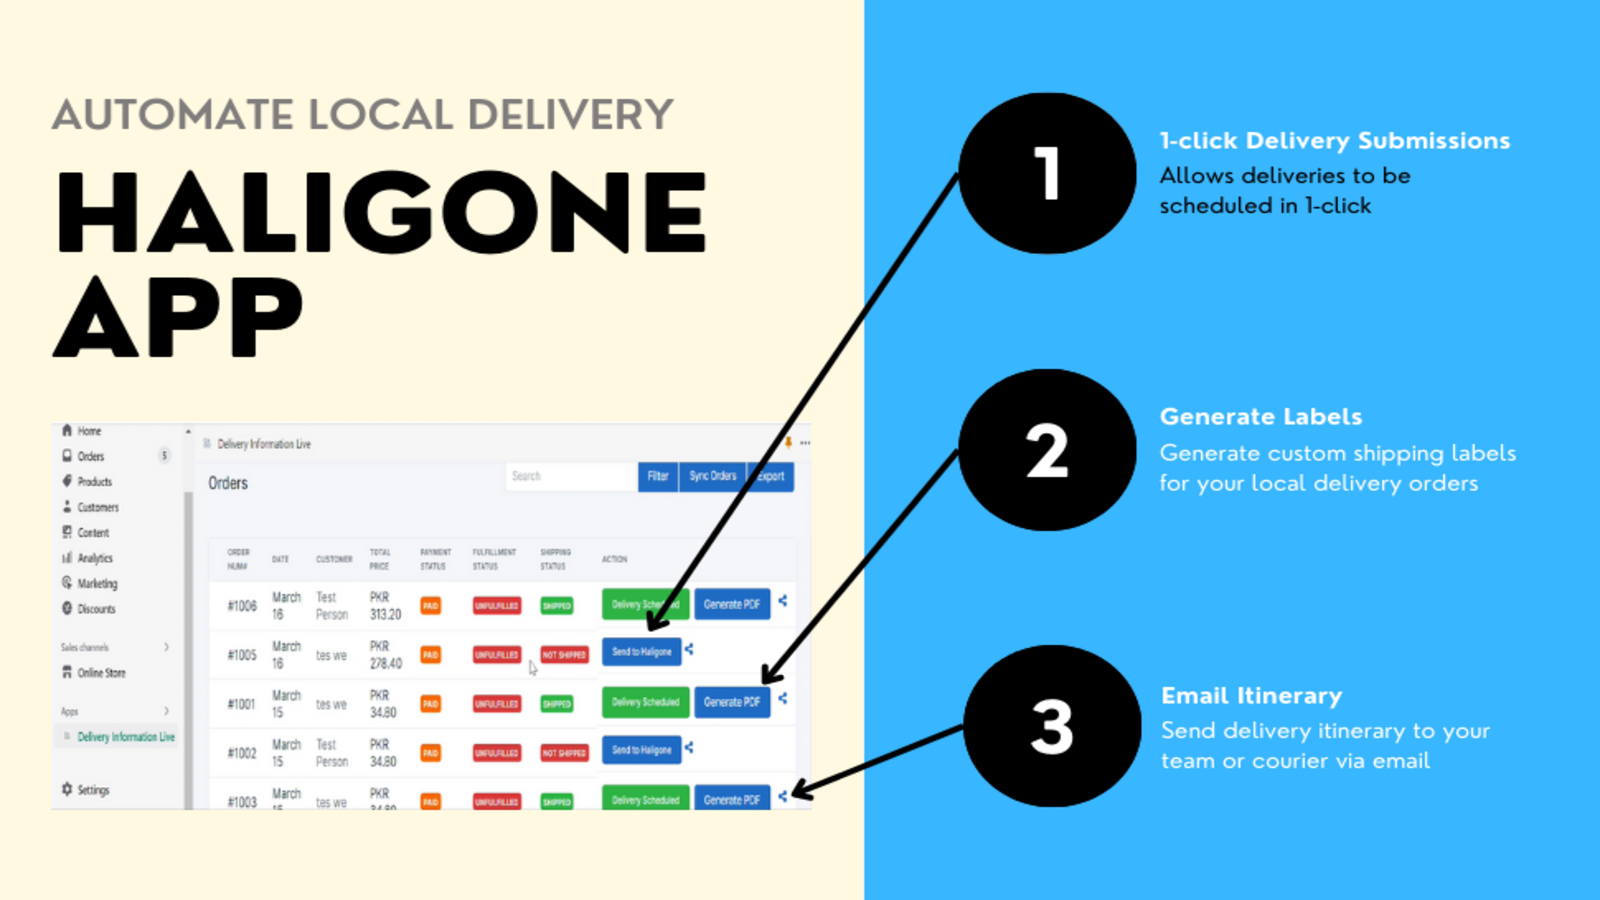 Here is how Haligone App can automate your local deliveries!